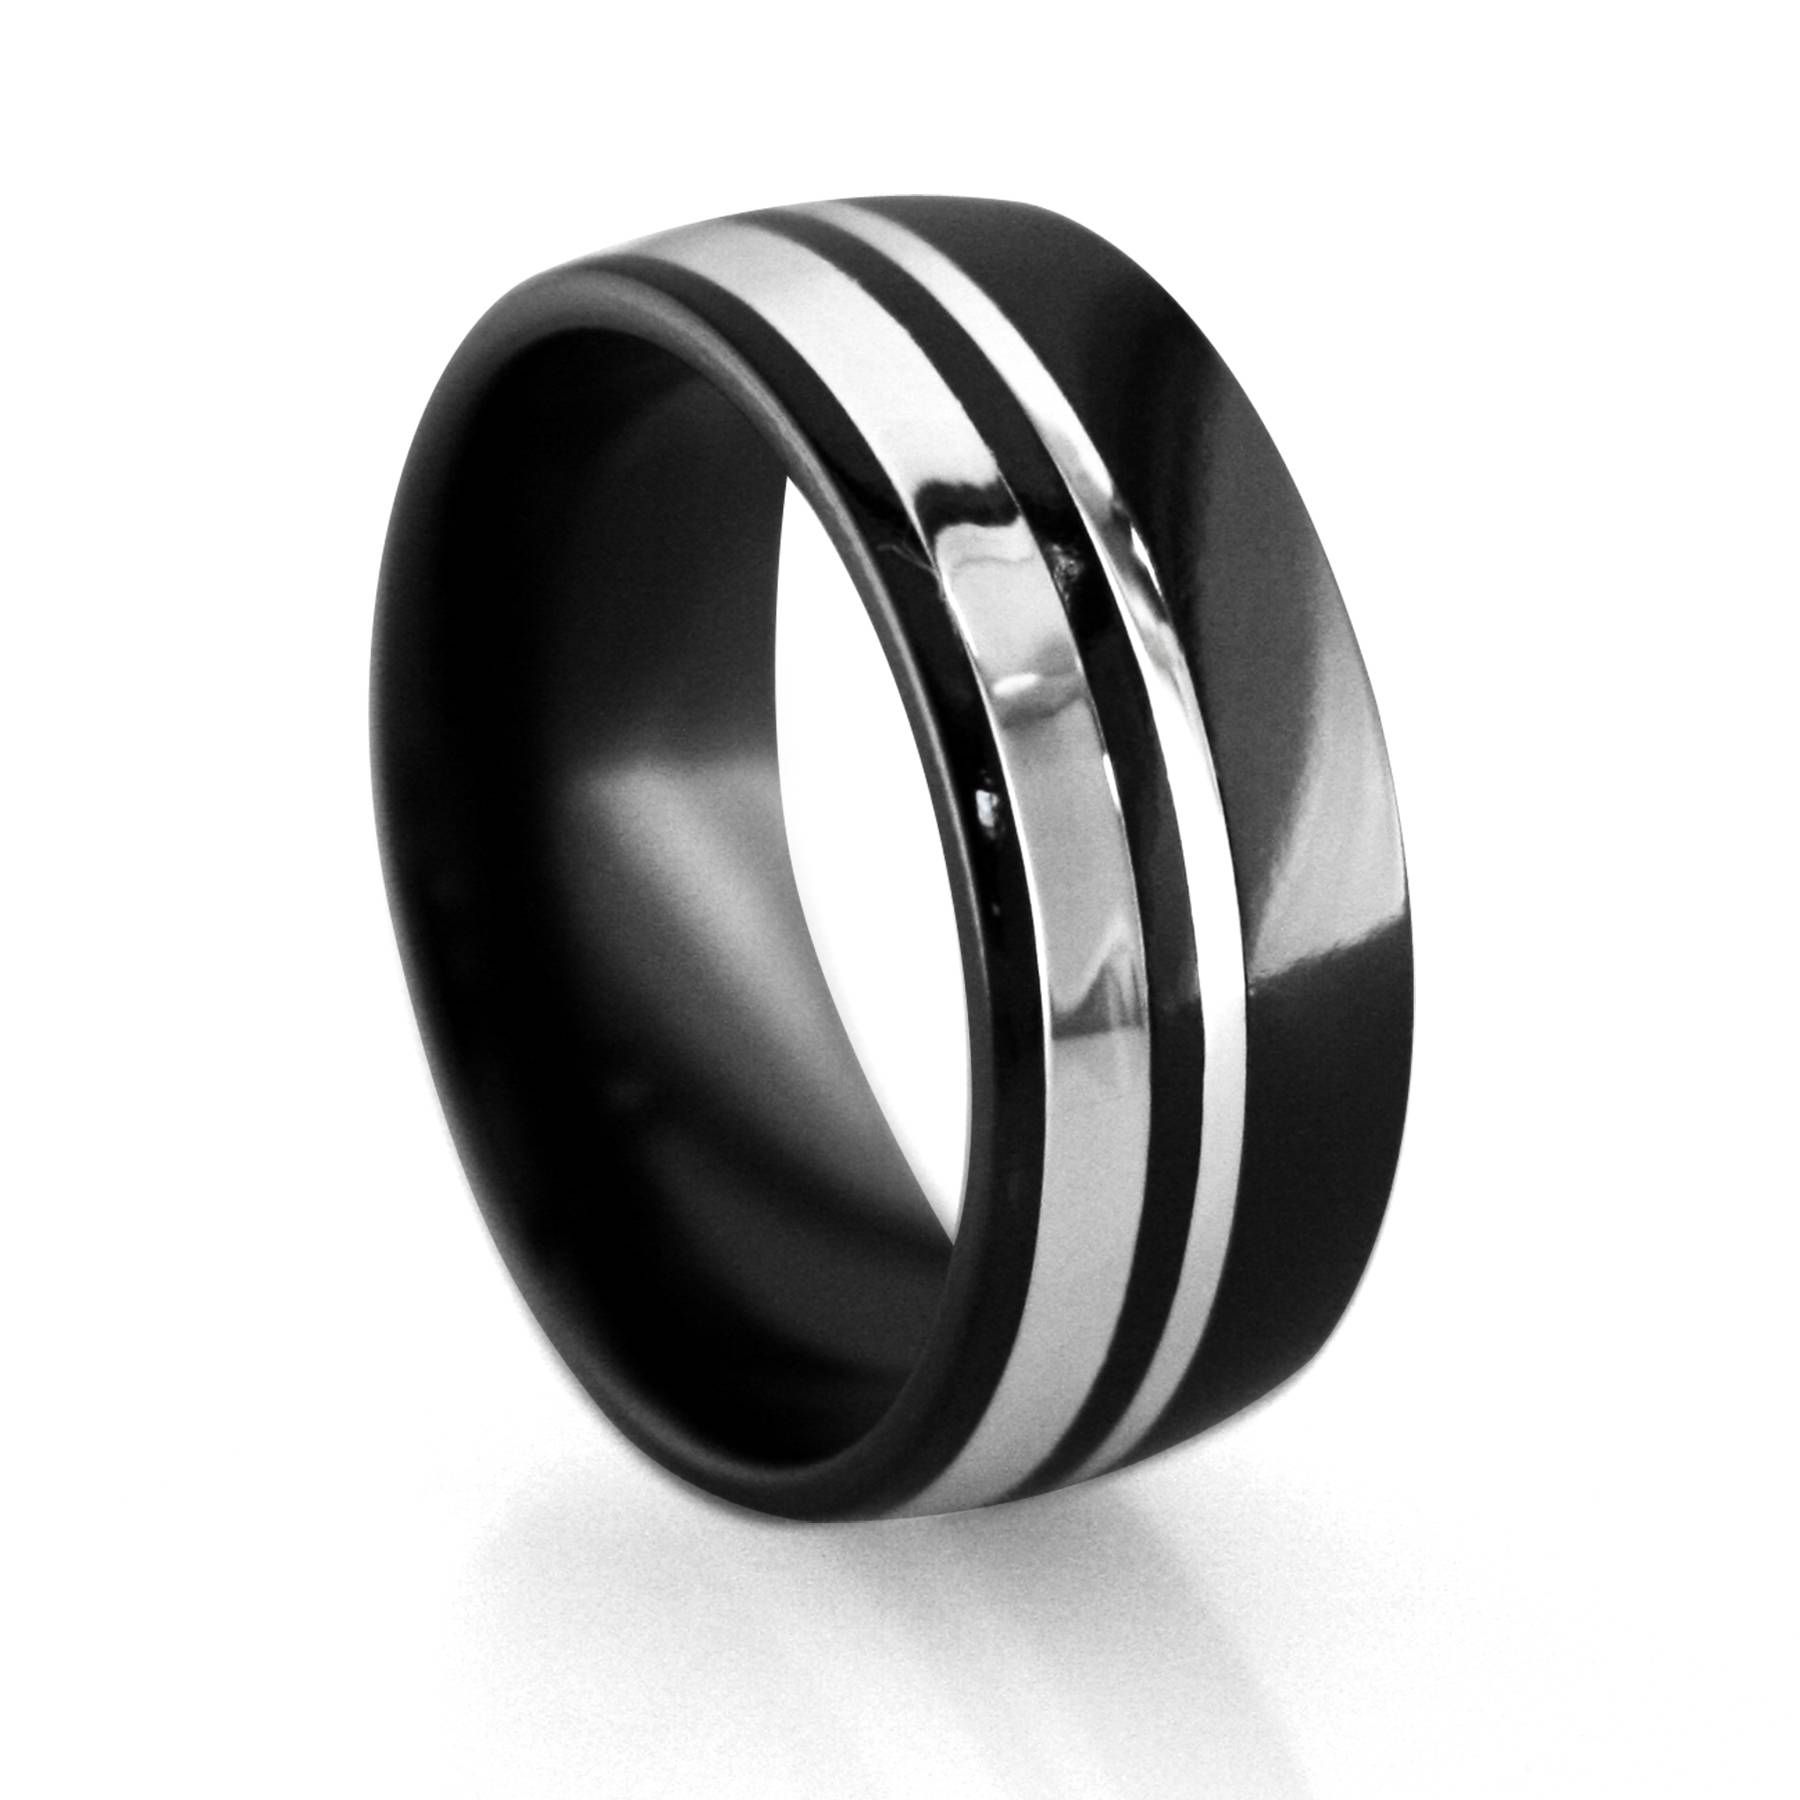 Black Gold Mens Wedding Rings Tags : Tungsten Mens Wedding Rings With Black And Gold Wedding Bands For Men (View 7 of 15)